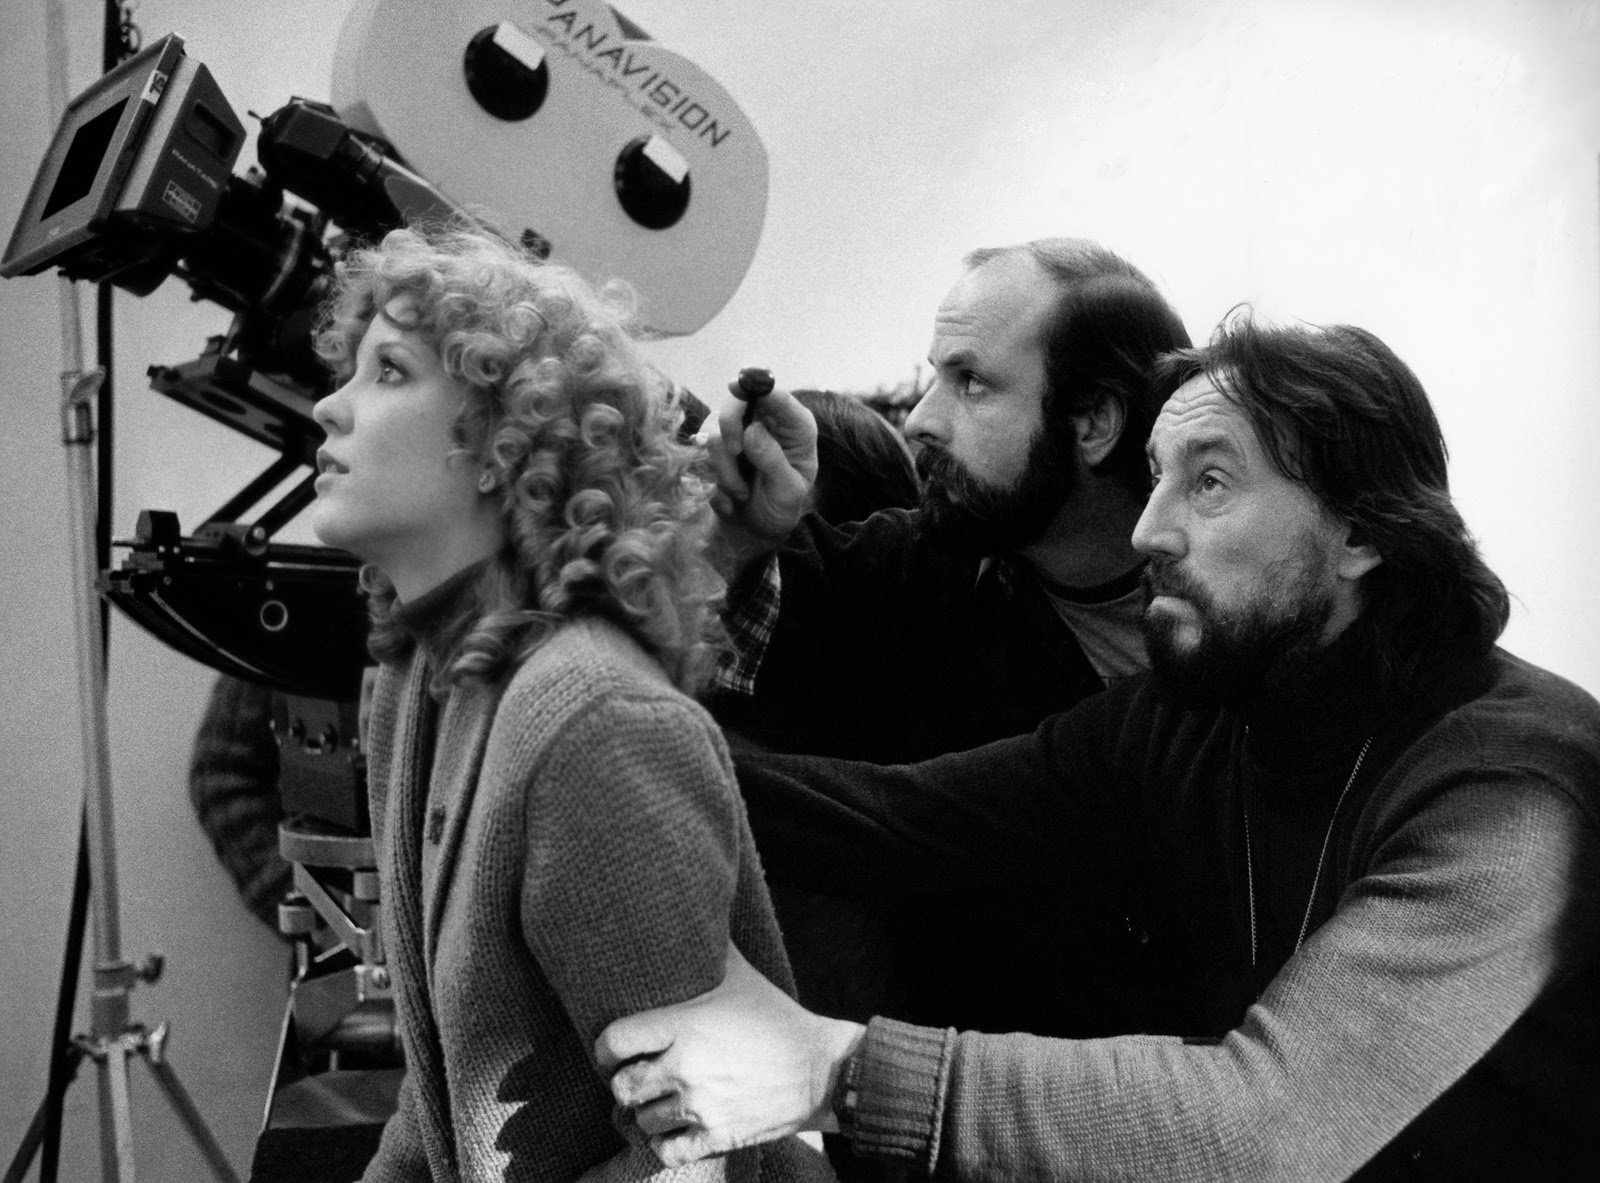 From left: Actress Nancy Allen, 1st AC Michael Gershman and Zsigmond on set for Blow Out.